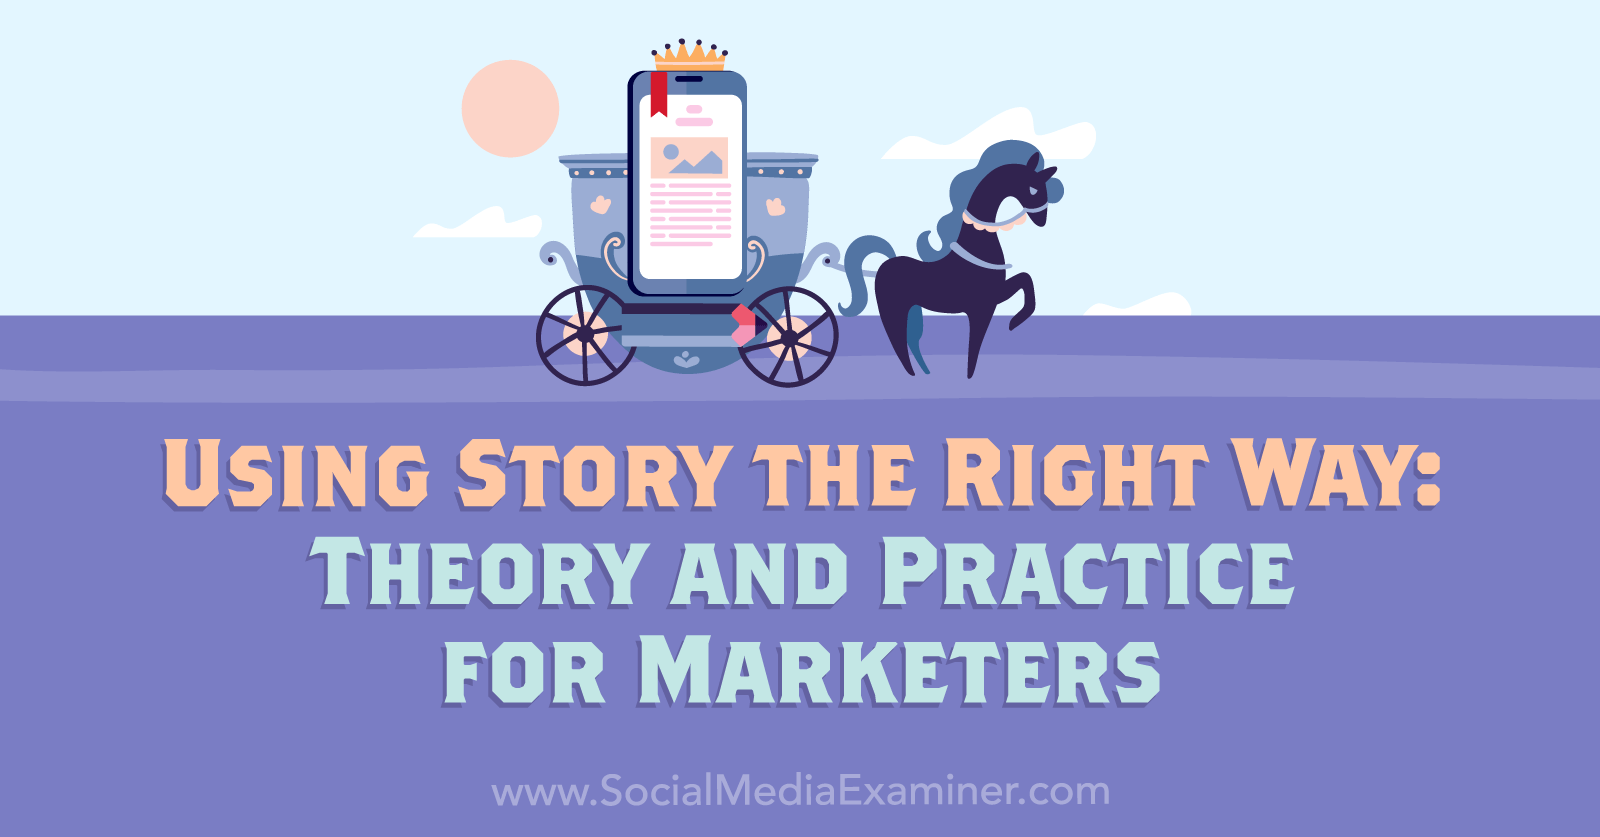 Using Story the Right Way: Theory and Practice for Marketers by Social Media Examiner